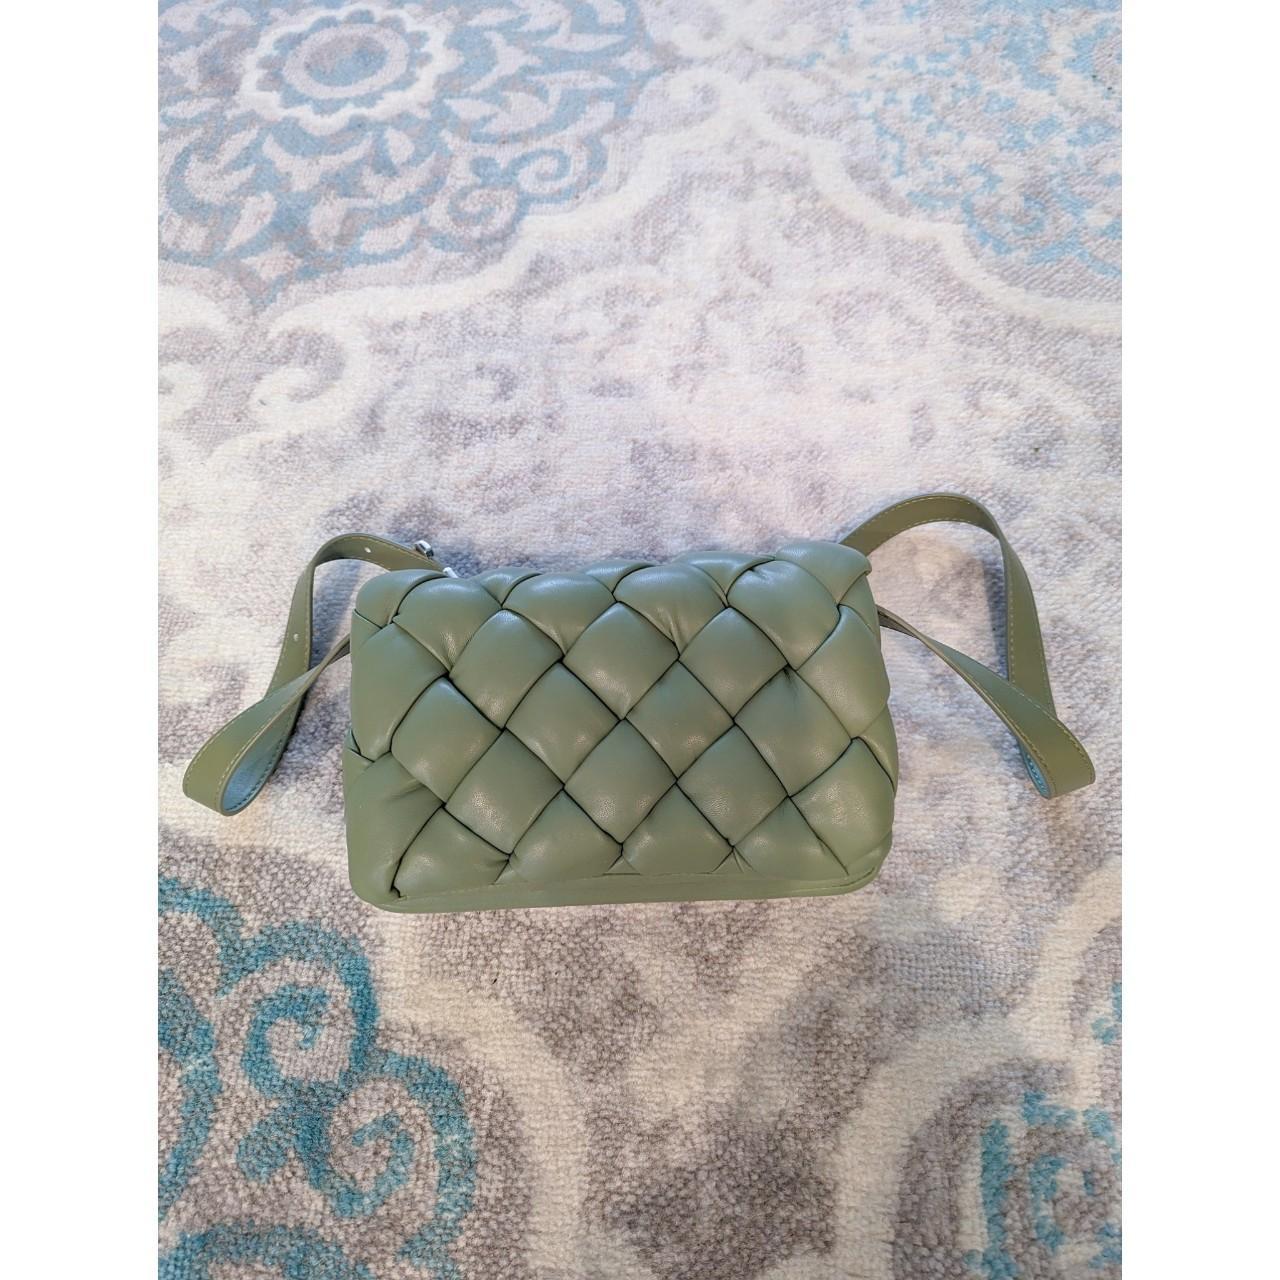 JW PEI MAZE BAG in SAGE GREEN  REVIEW TIPS AND MOD SHOTS [ENG] 